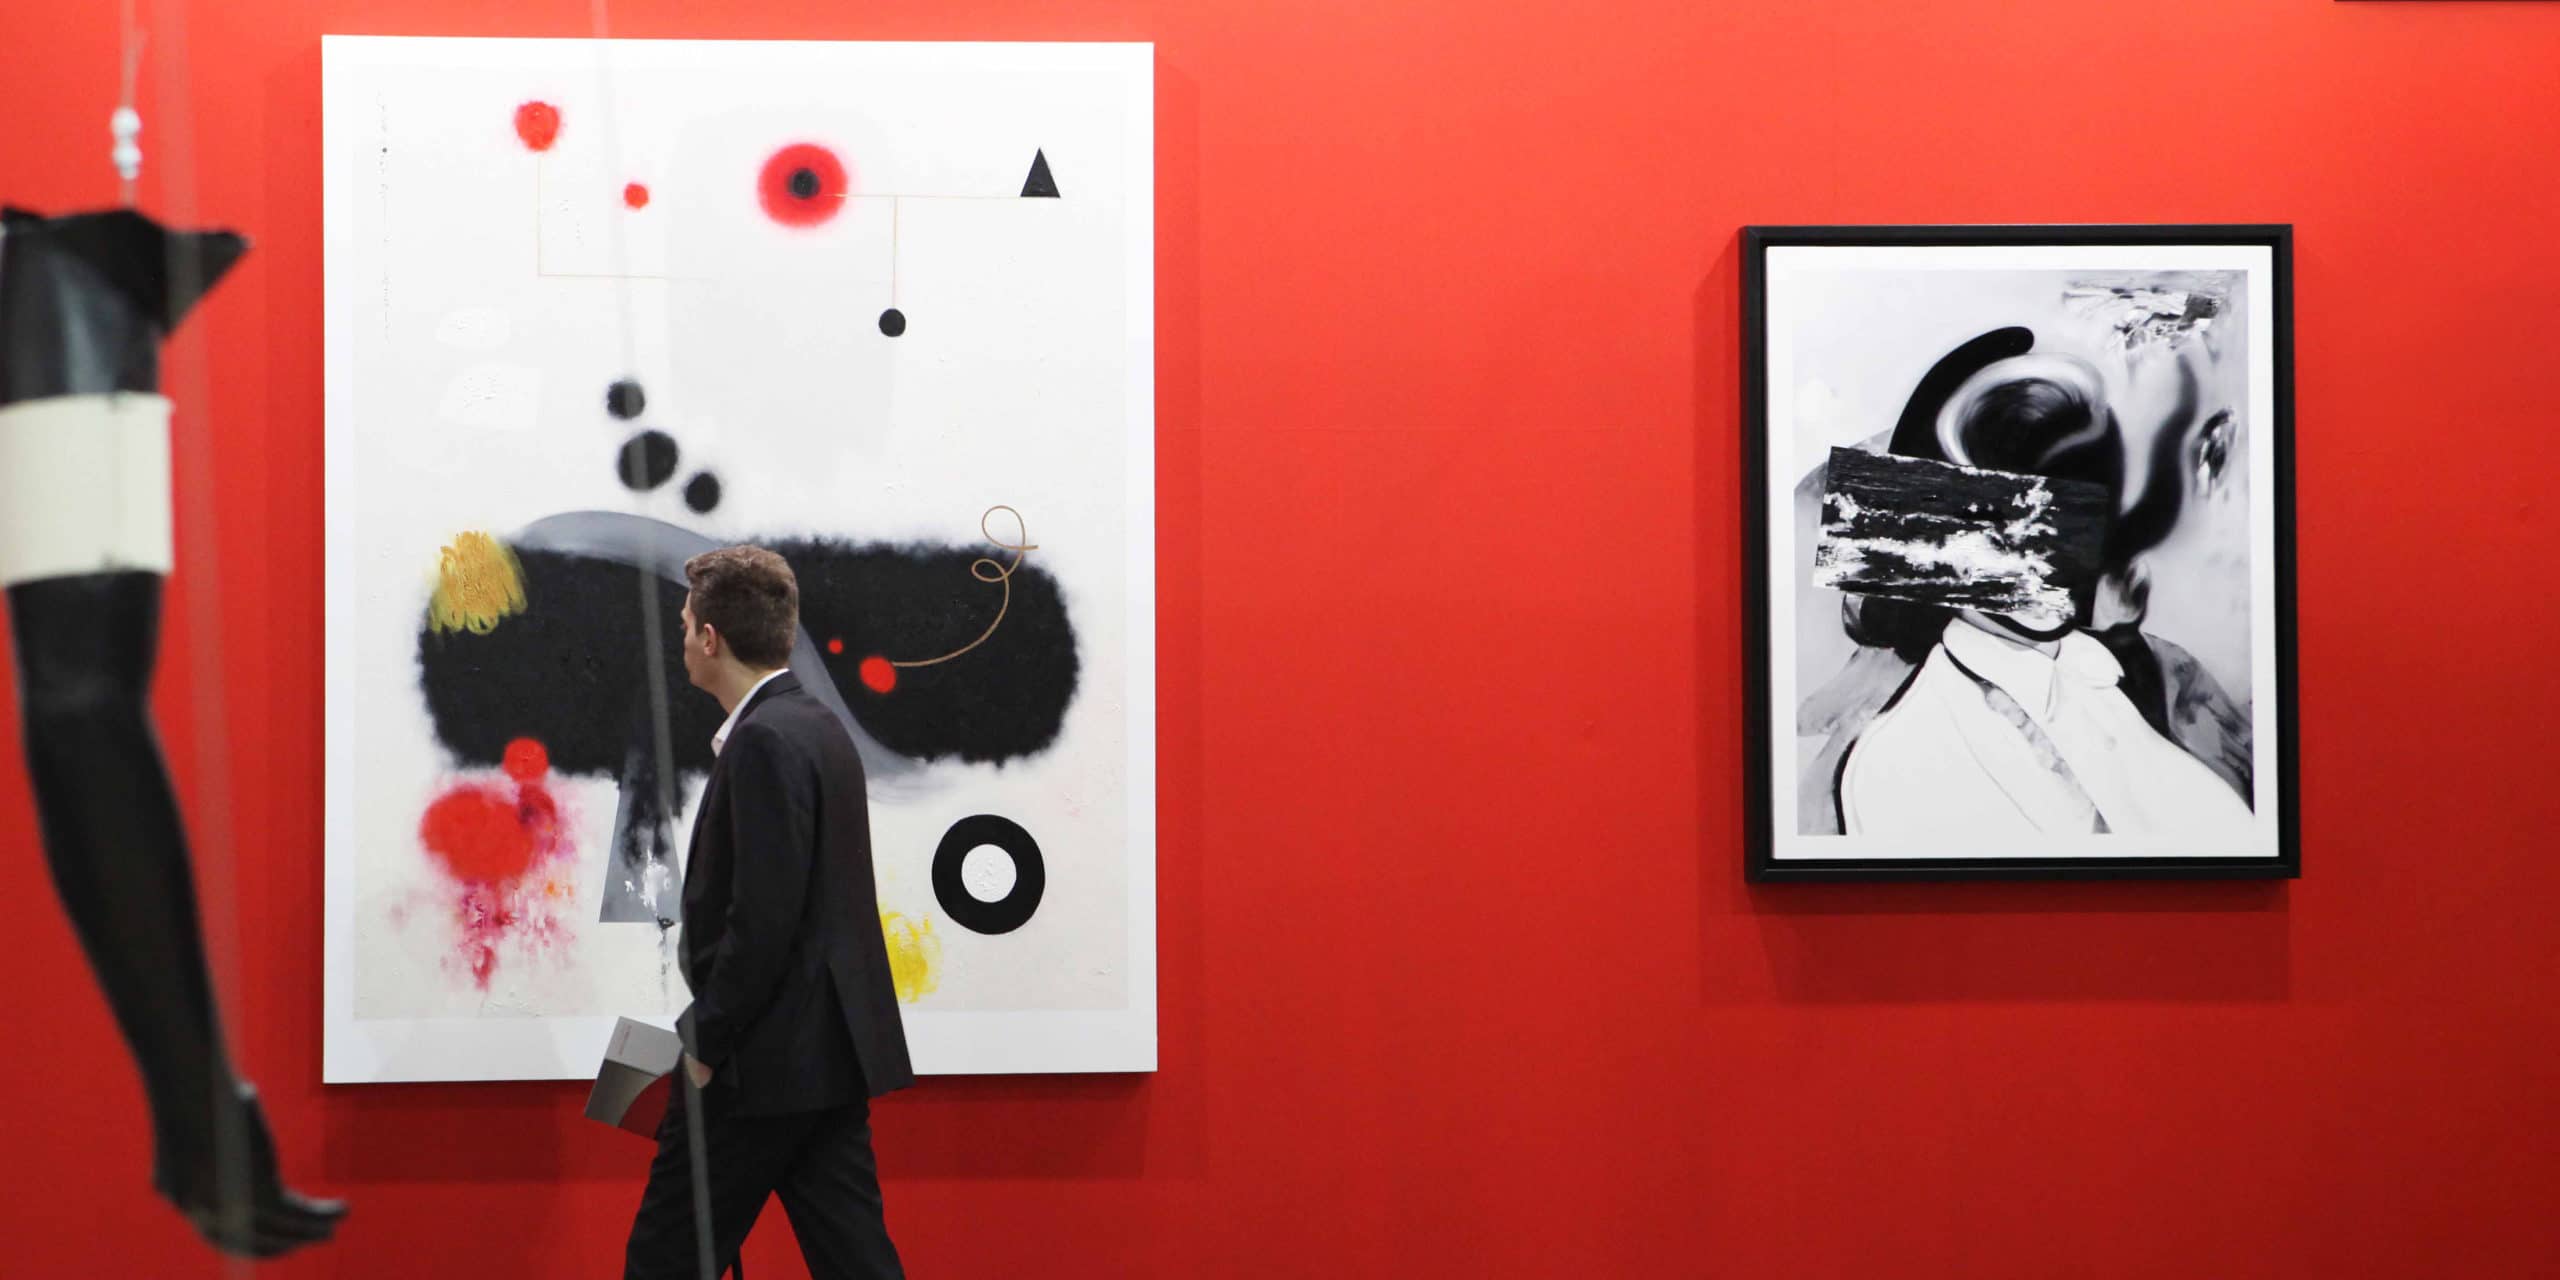 Man walking past paintings hanging on a red wall. Sample exhibit from Italy's premier art fair, Artissima.